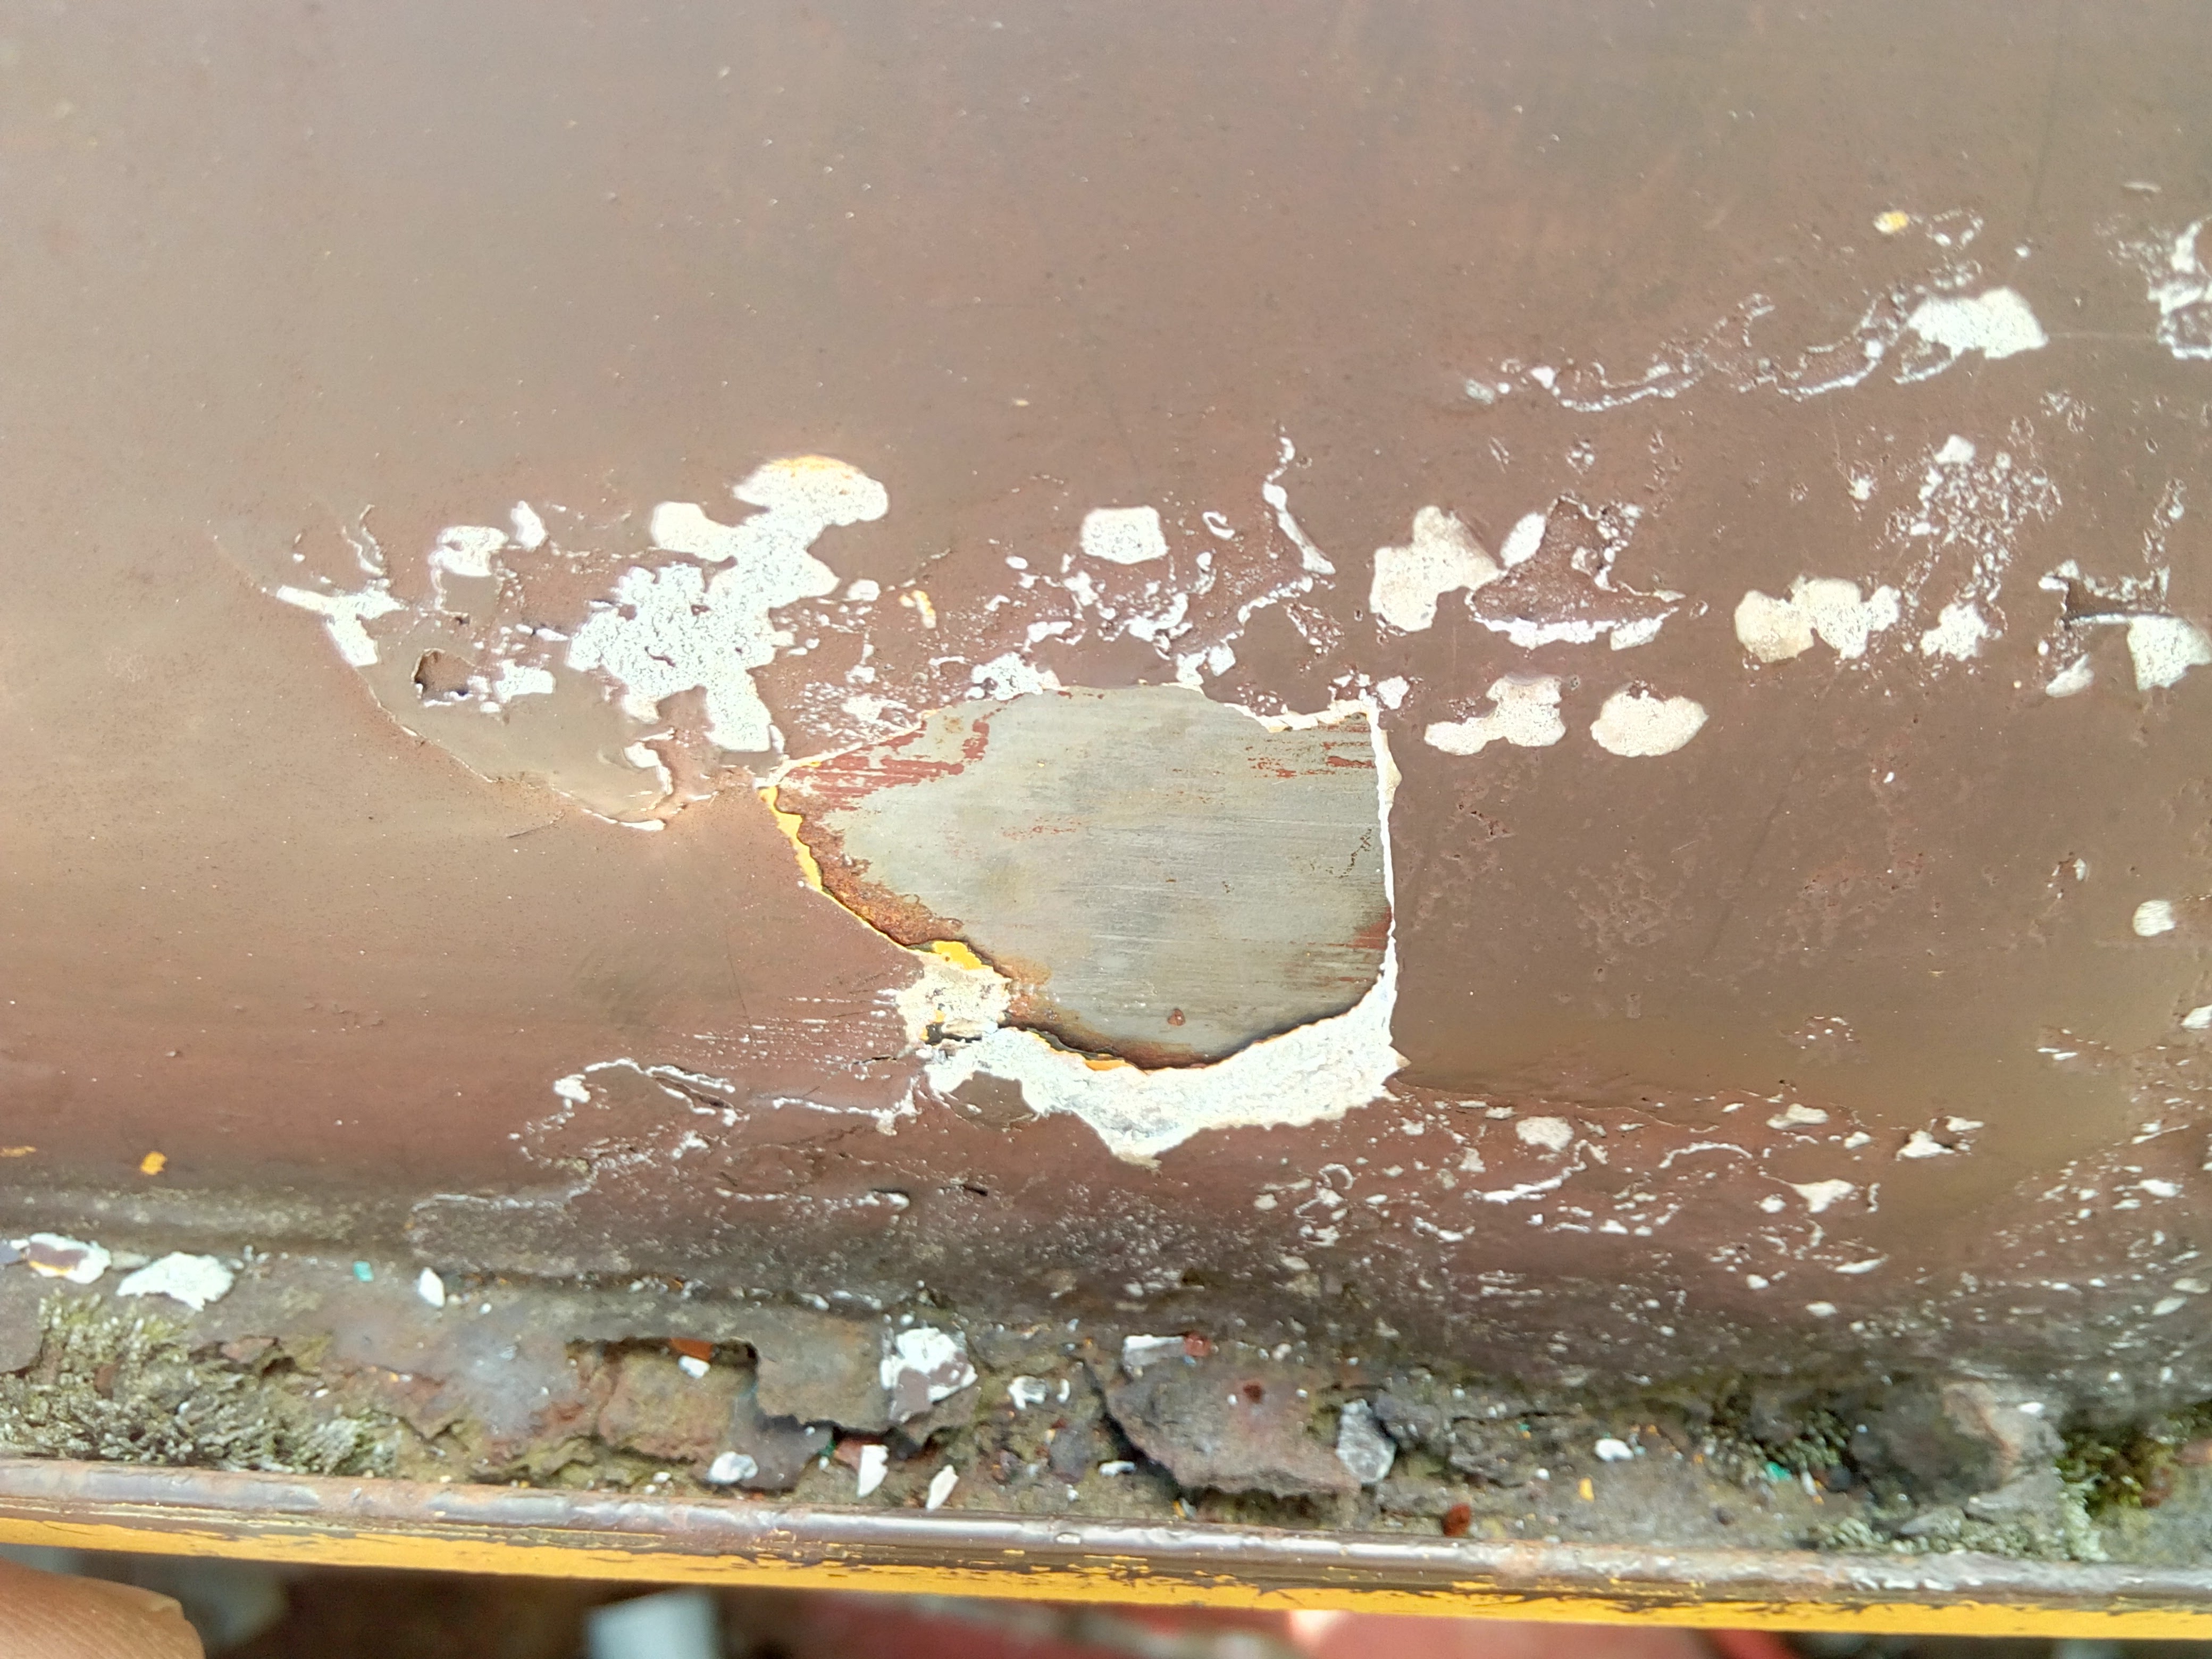 The previously photographed crust of filler has been pried off, revealing pristine sheet metal.